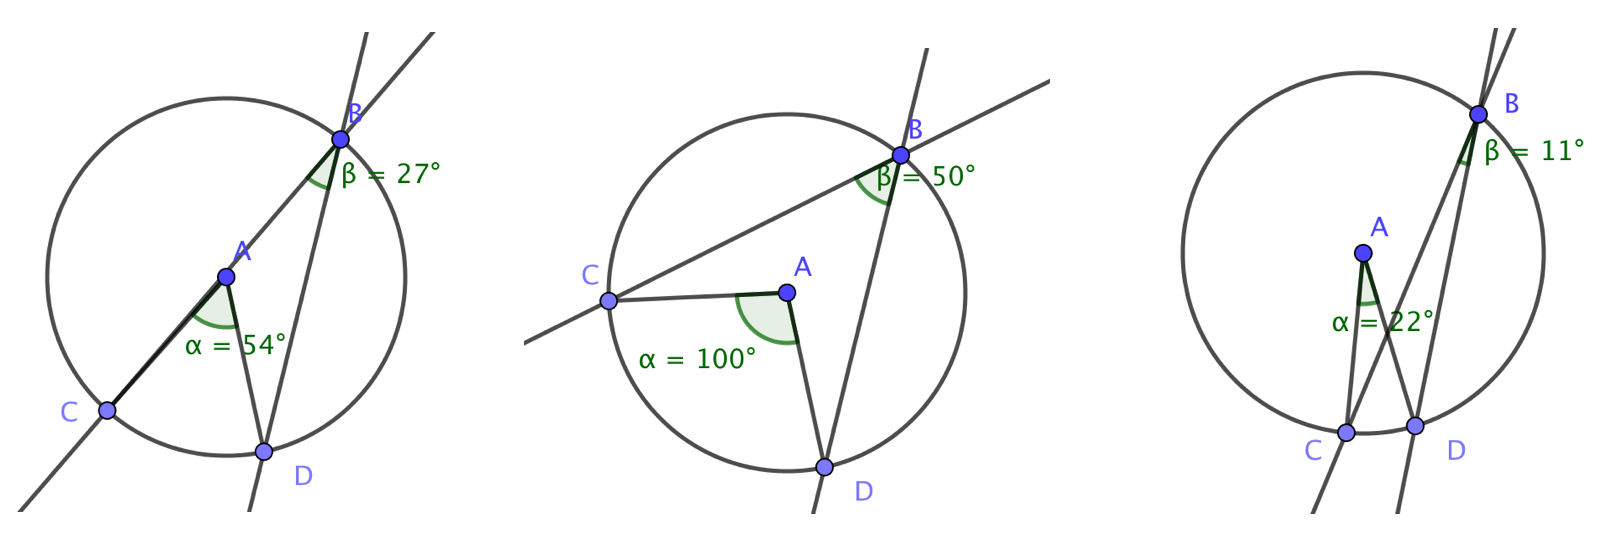 how-to-prove-the-central-angle-inscribed-angle-theorem-k-12-math-problems